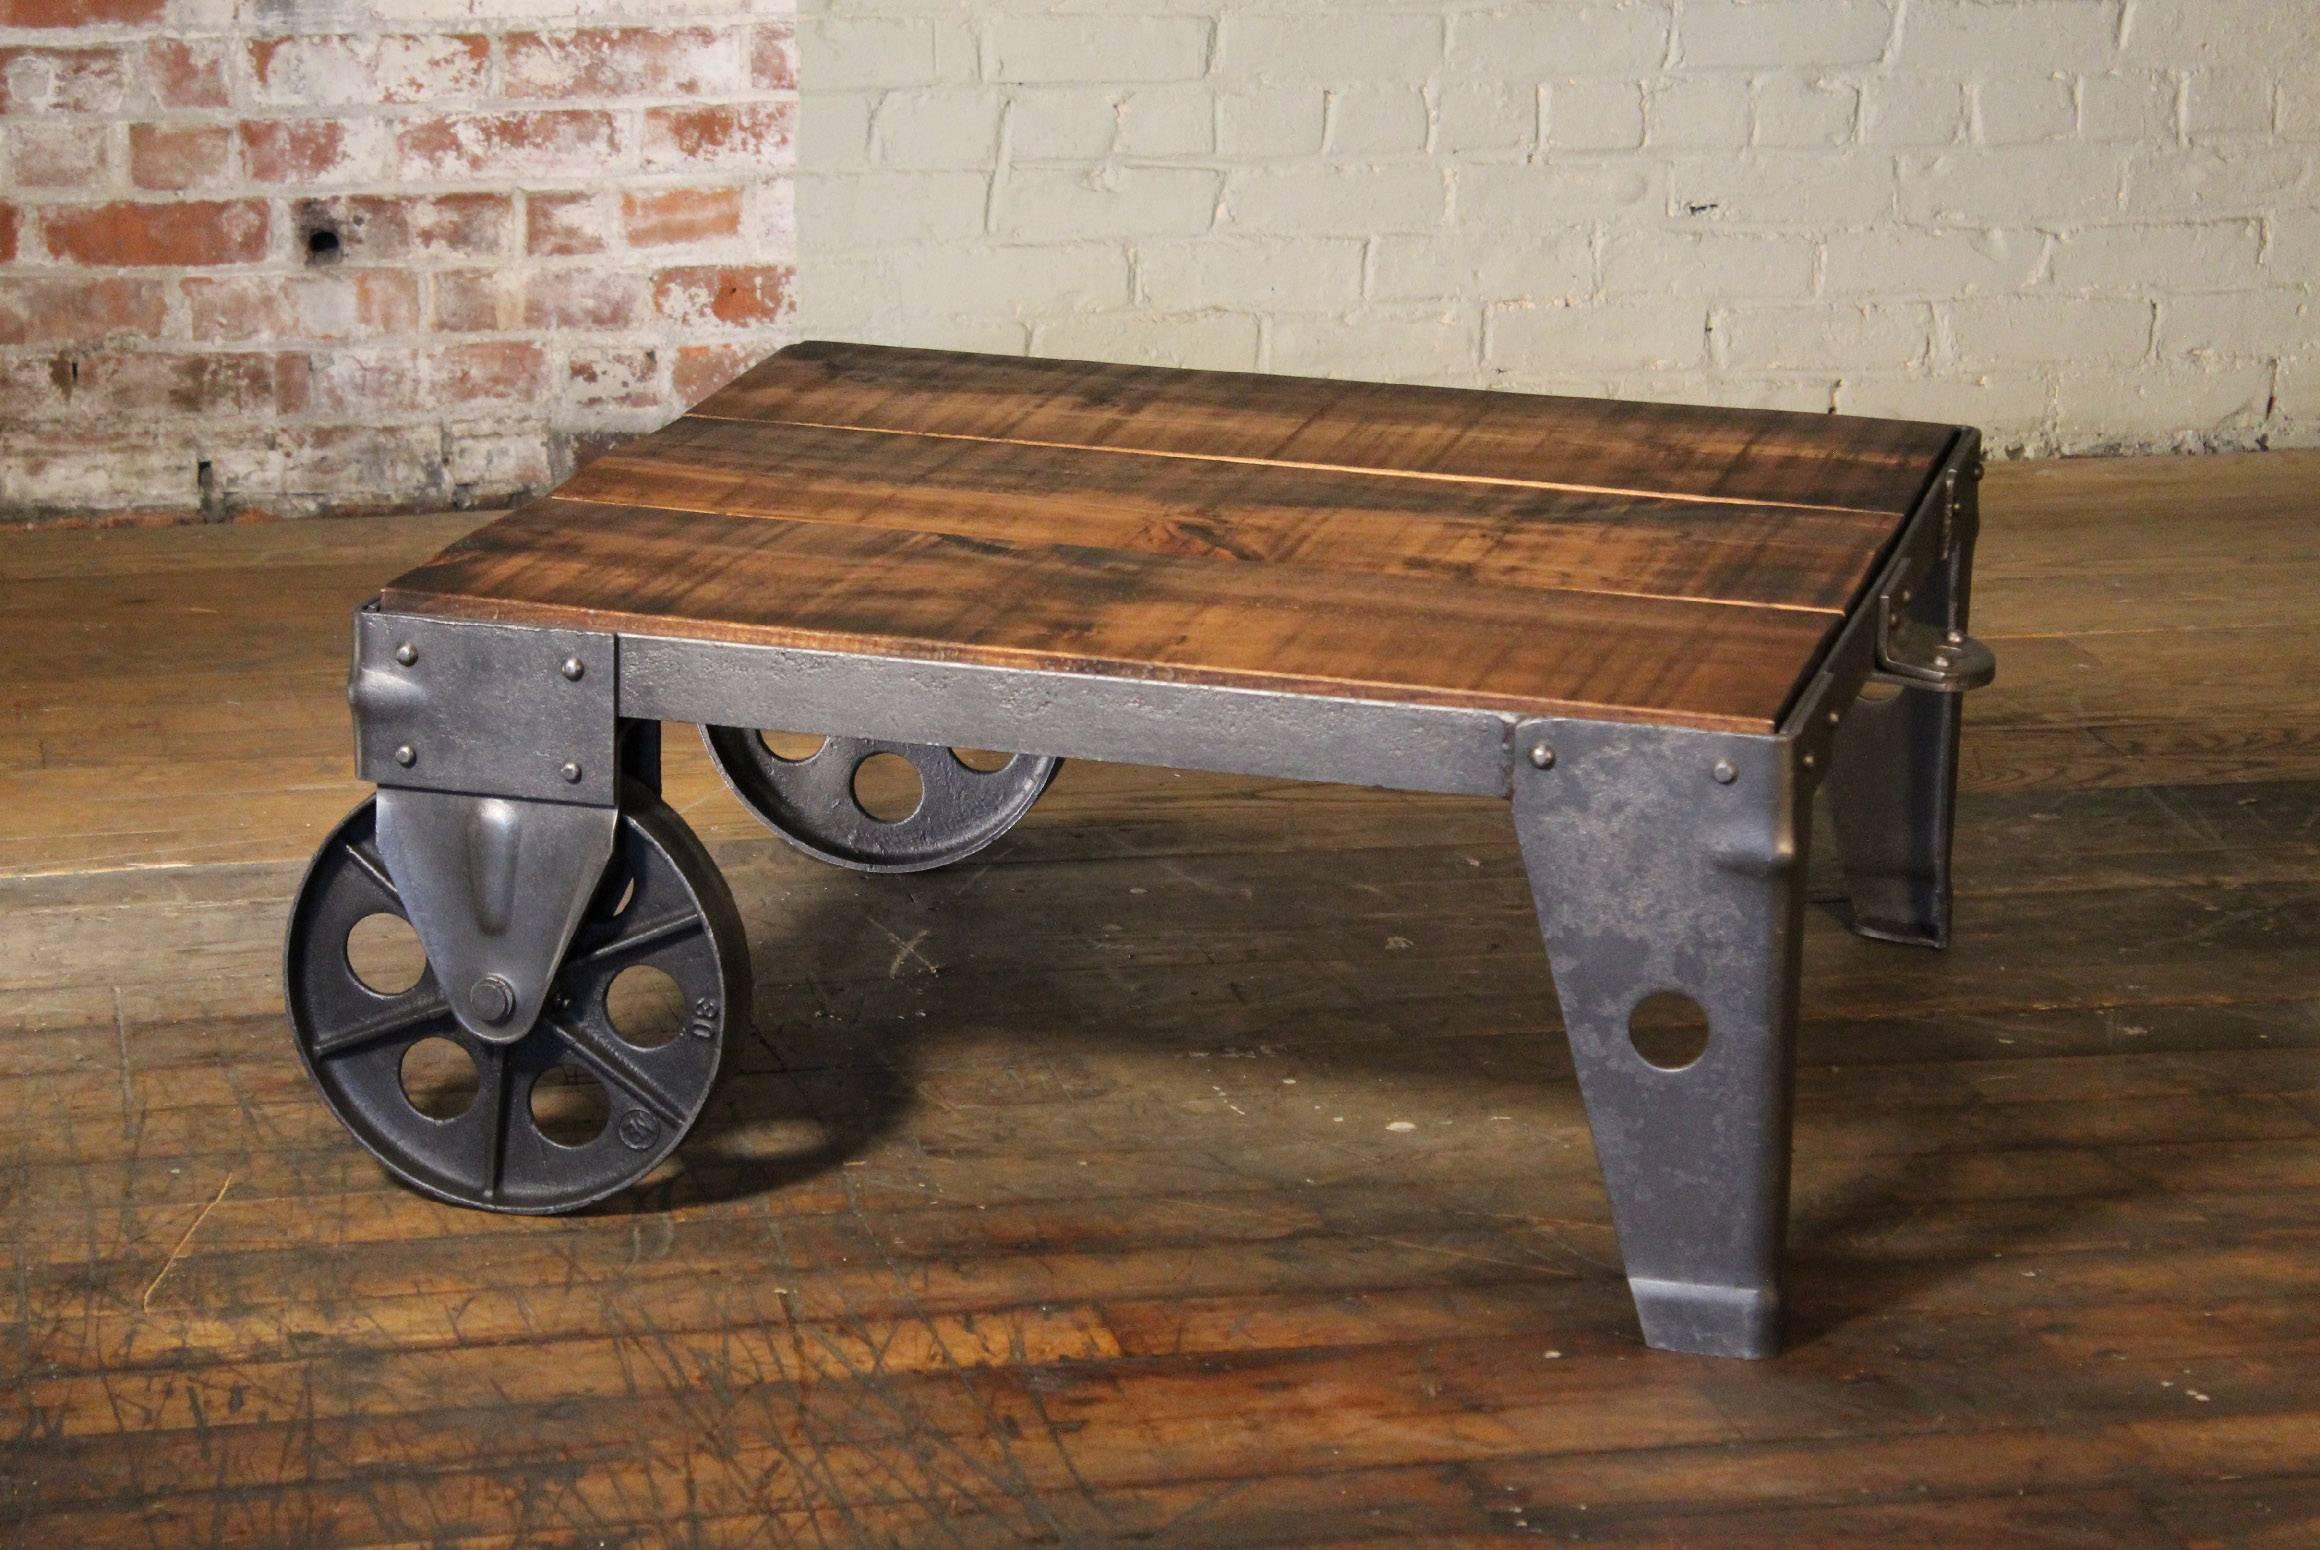 Metal Authentic Vintage Industrial Cart Coffee Table Factory Shop Wood Steel and Iron For Sale